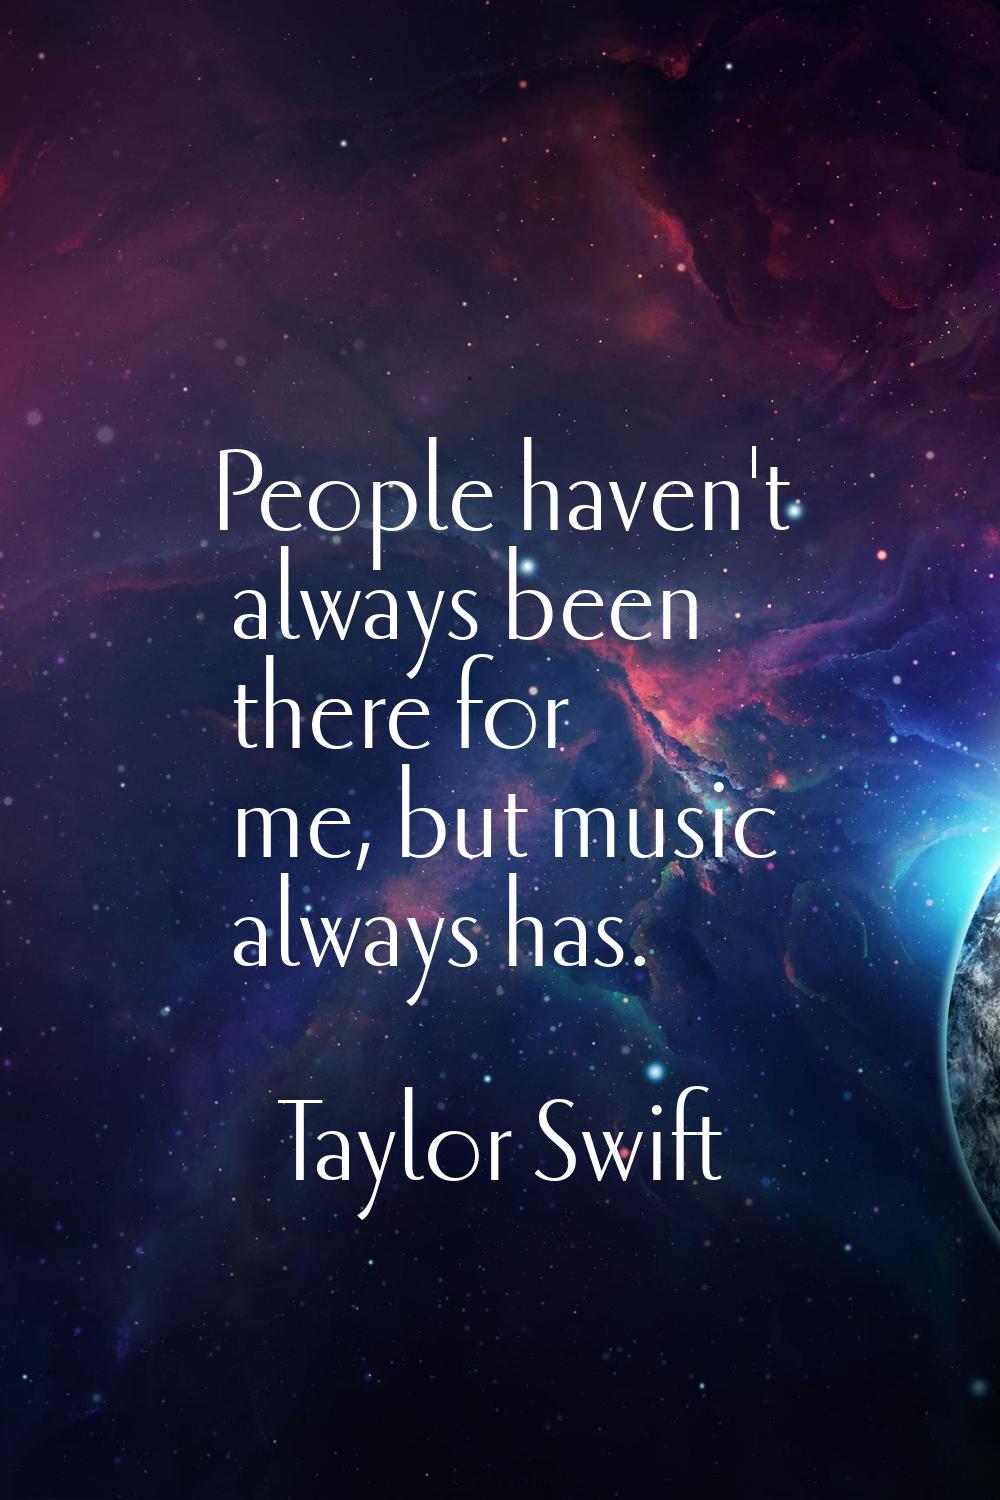 People haven't always been there for me, but music always has.